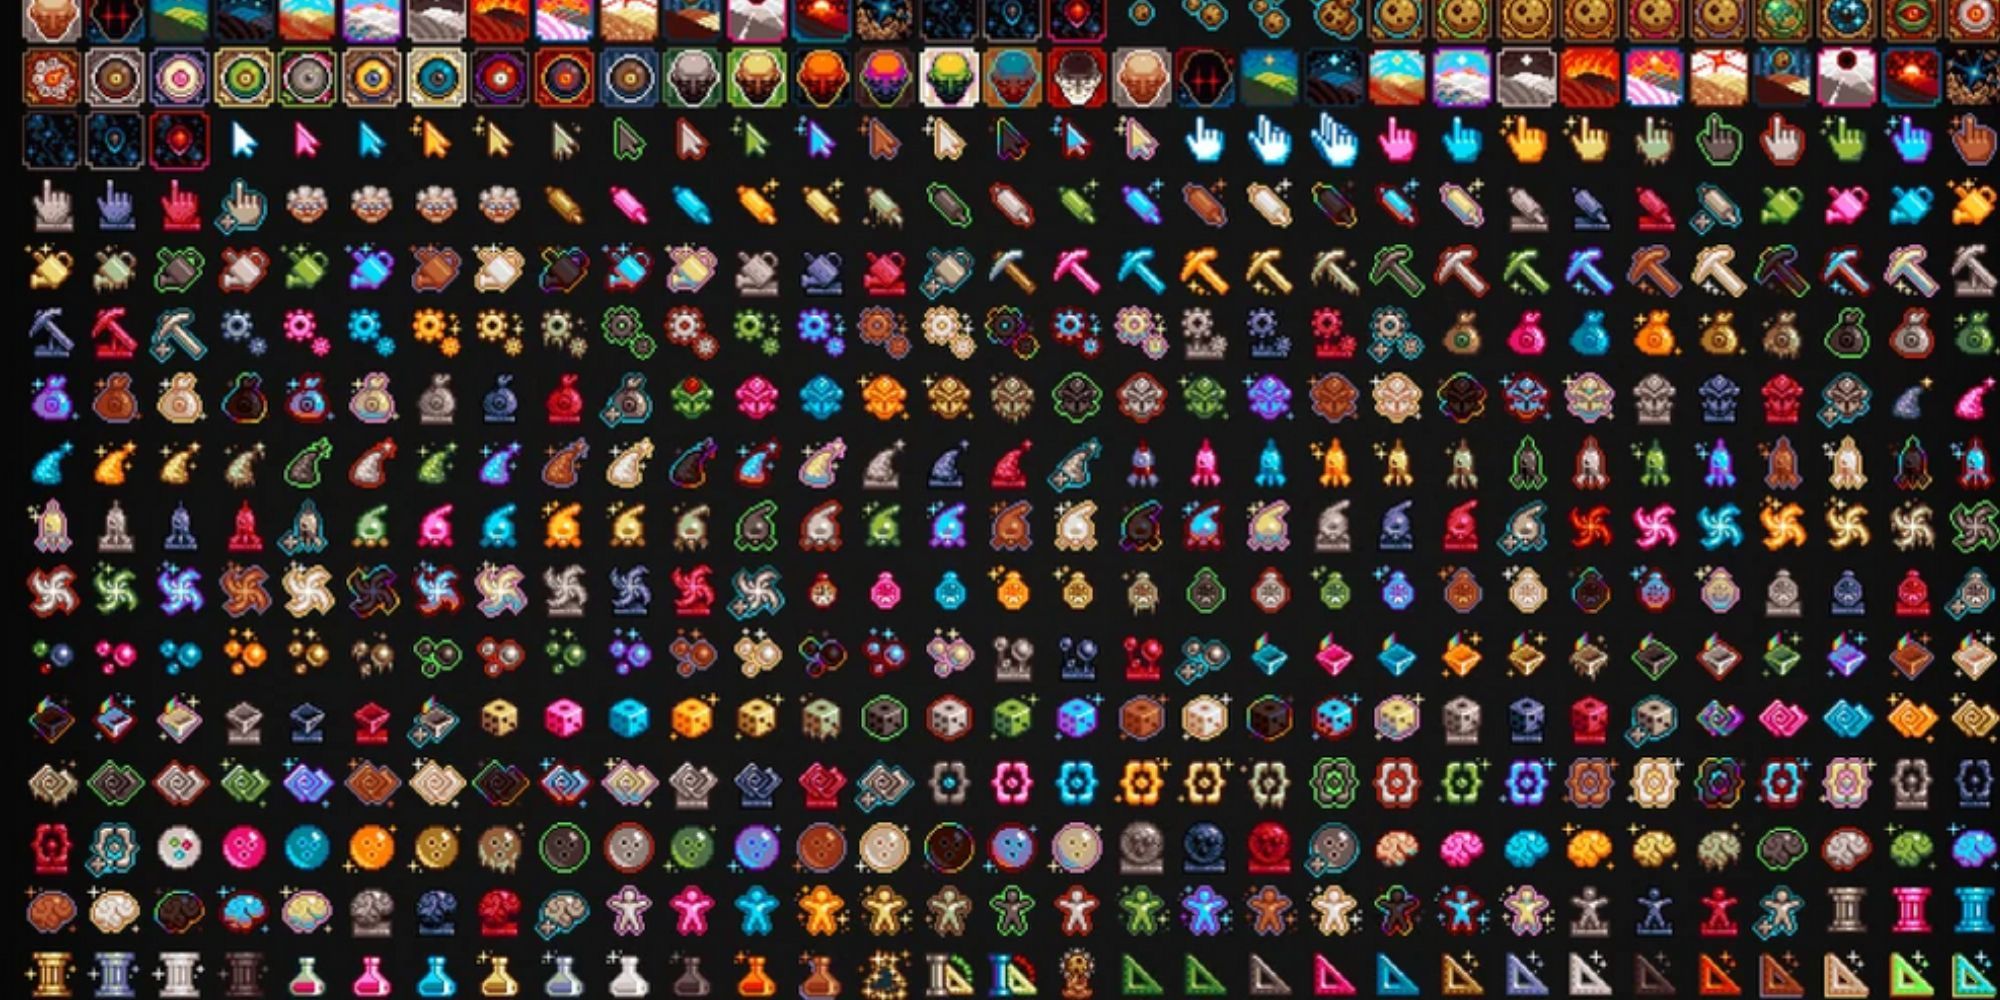 Over 100 icons in different colors representing achievements.